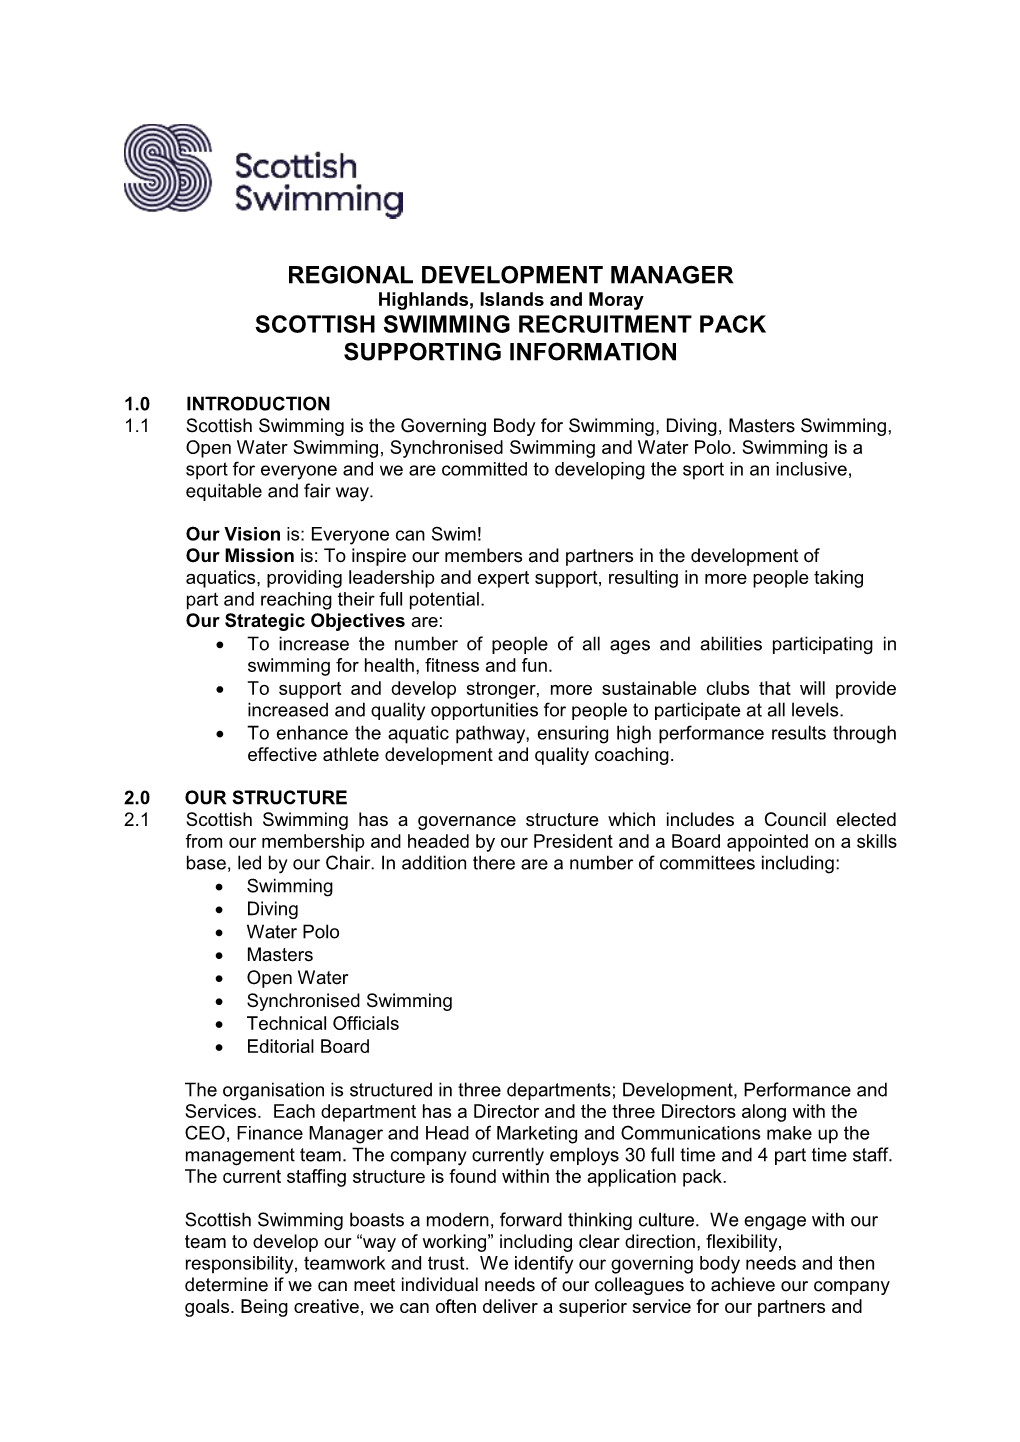 REGIONAL DEVELOPMENT MANAGER Highlands, Islands and Moray SCOTTISH SWIMMING RECRUITMENT PACK SUPPORTING INFORMATION